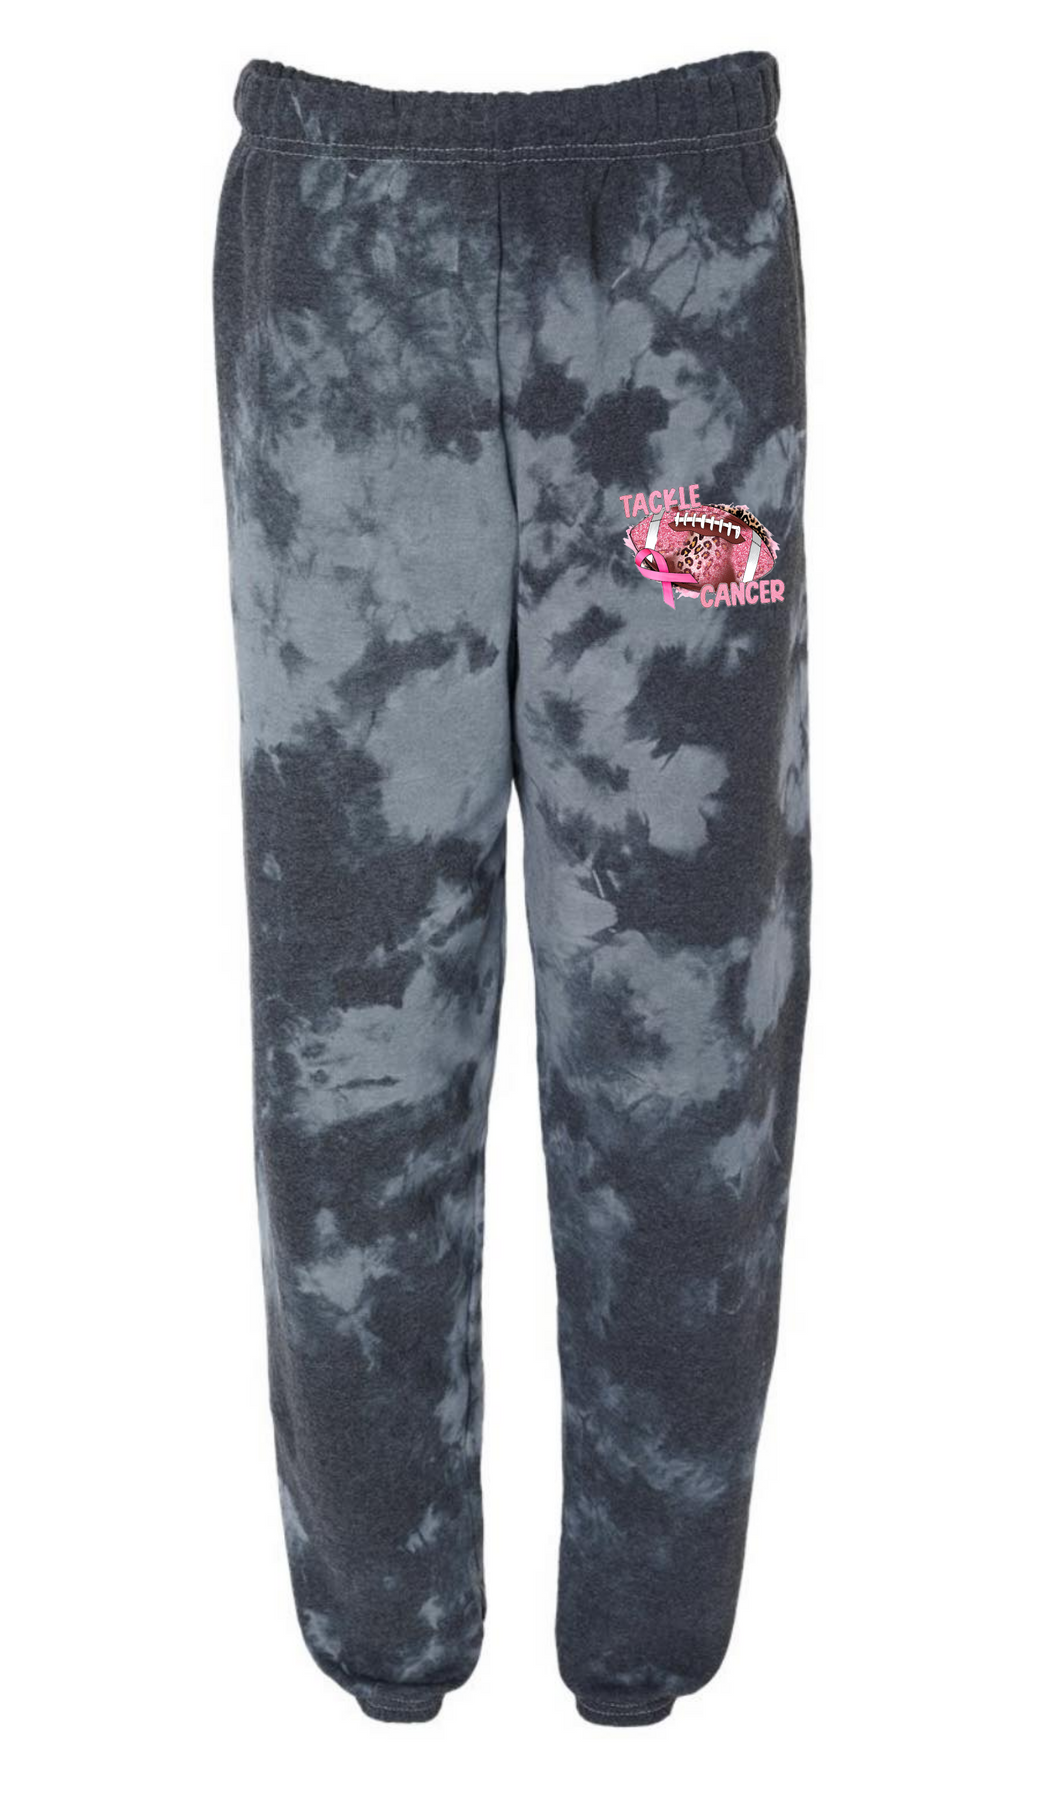 **Limited Edition** Tackle Cancer Tie Dye Sweatpants